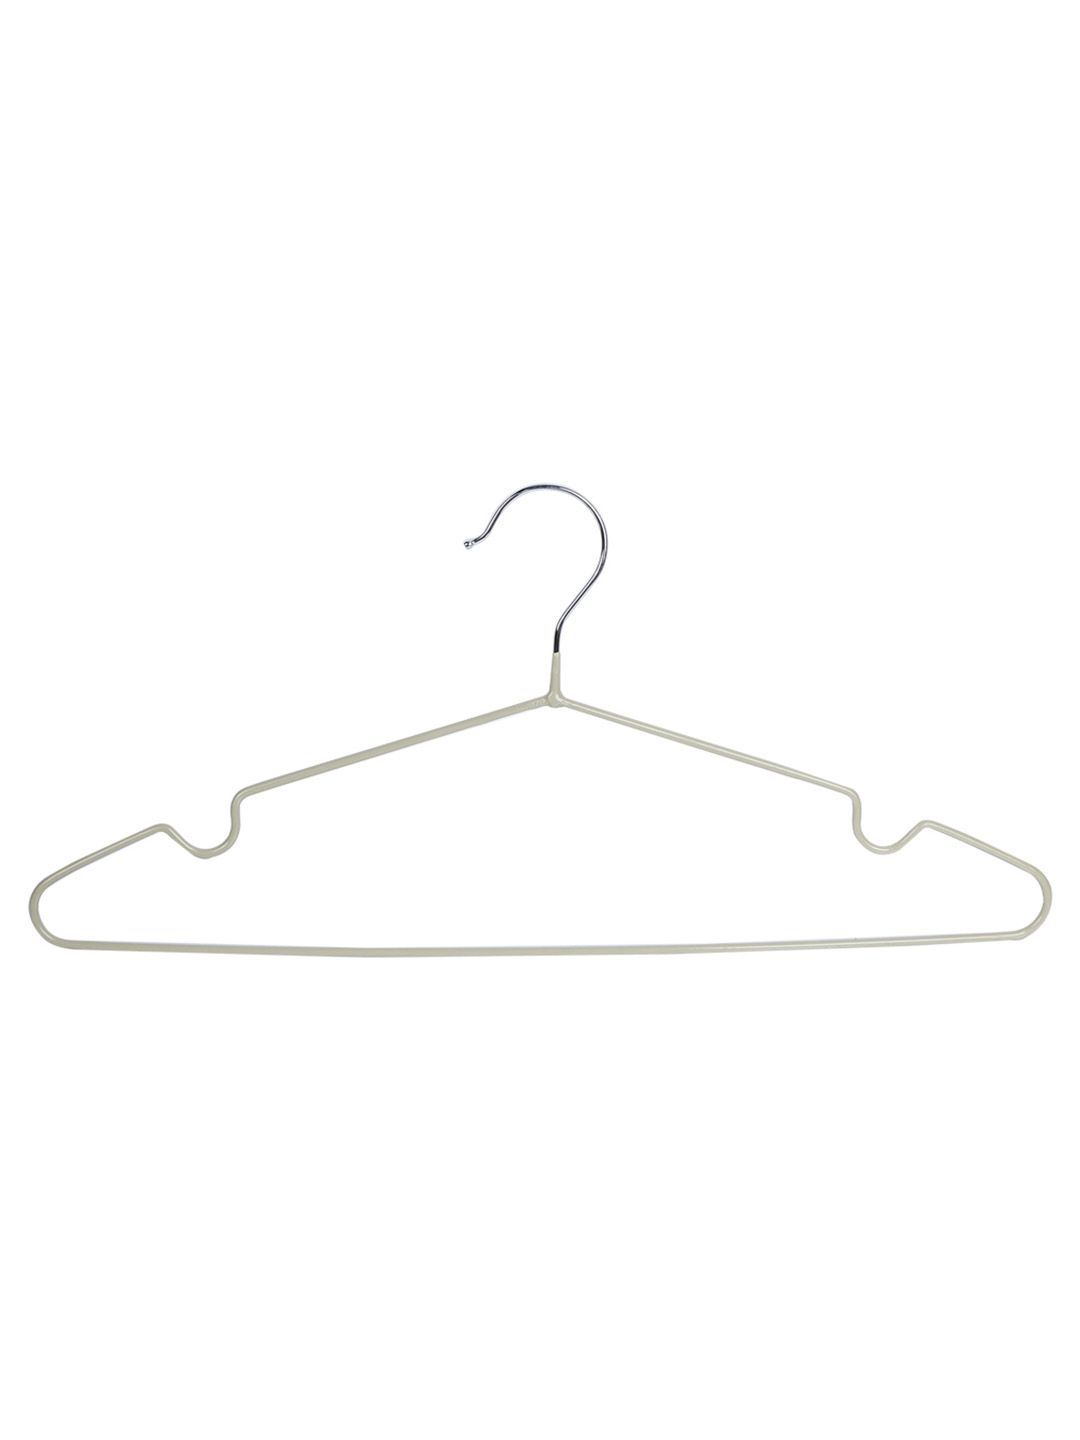 MARKET99 Olive Green Pack of 10 Cloth Hanger Price in India